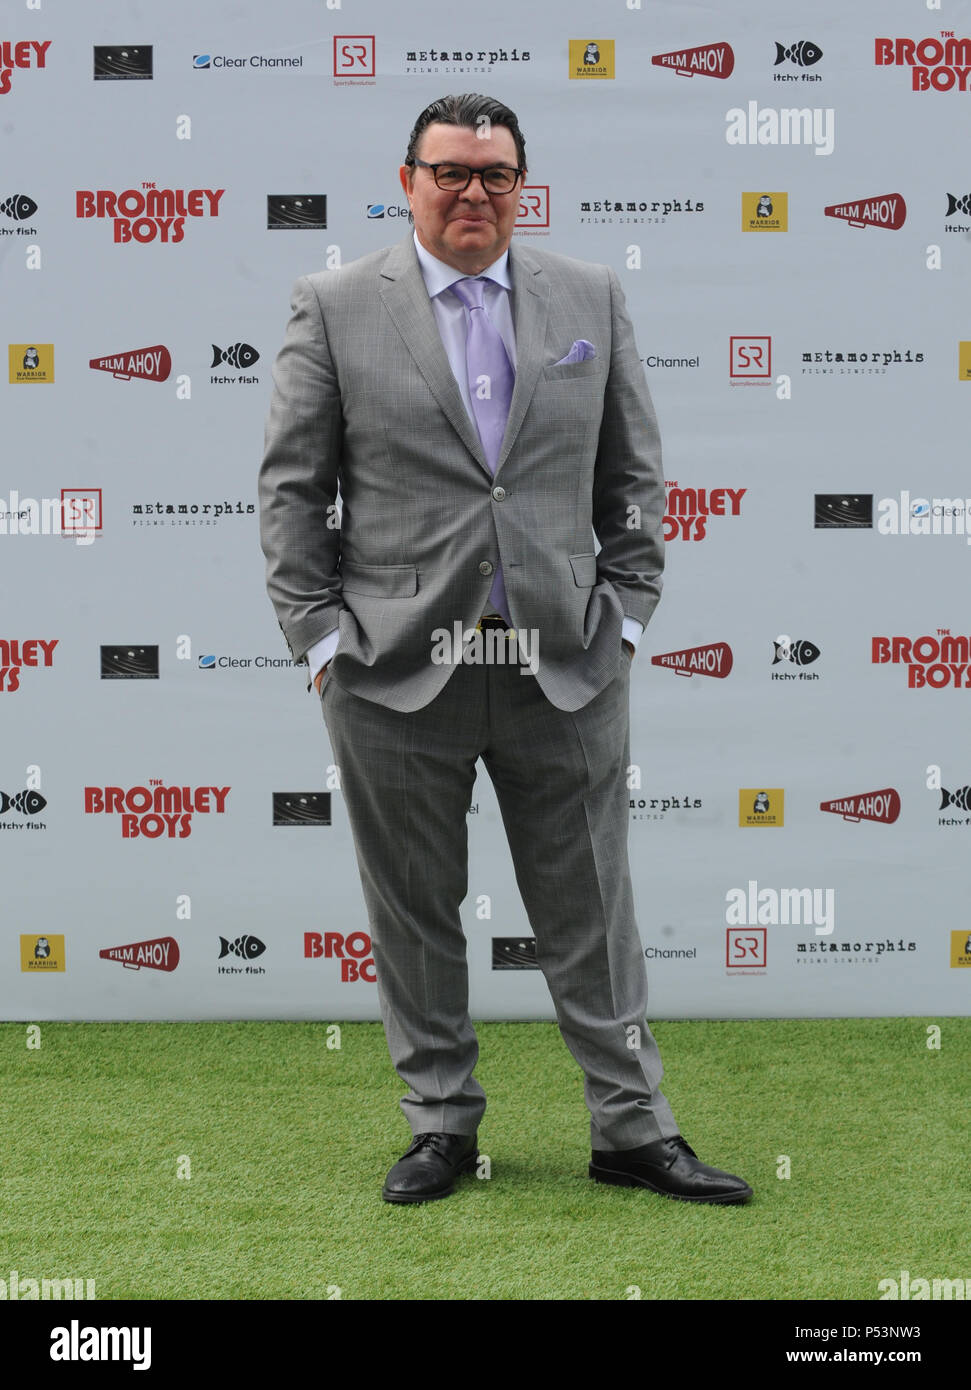 'The Bromley Boys' - Premiere at Wembley Stadium - Arrivals  Featuring: Jamie Foreman Where: London, United Kingdom When: 24 May 2018 Credit: WENN.com Stock Photo